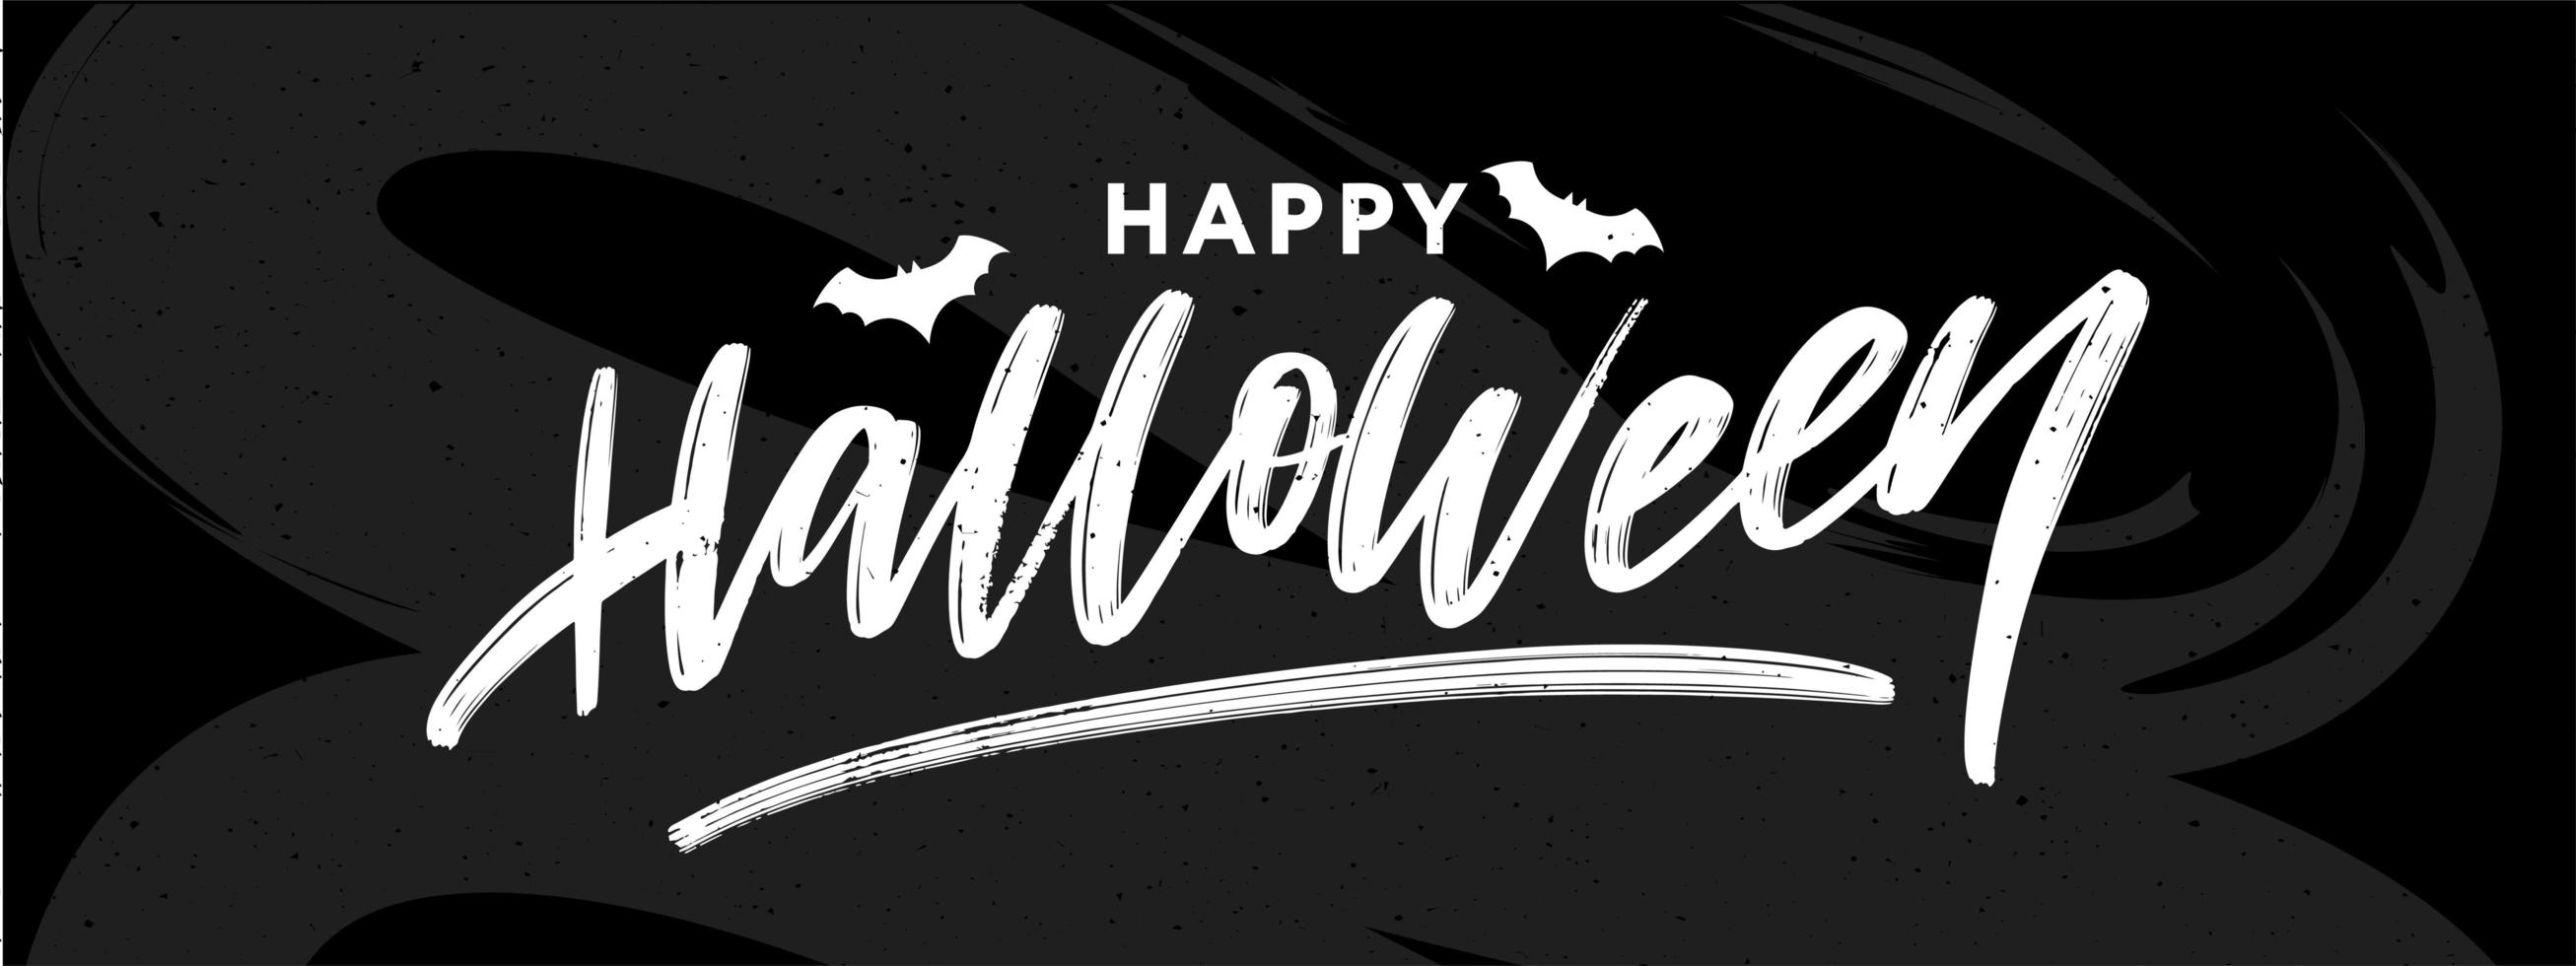 Happy Halloween Text Banner Lettering Holiday Special offer Shop Now vector